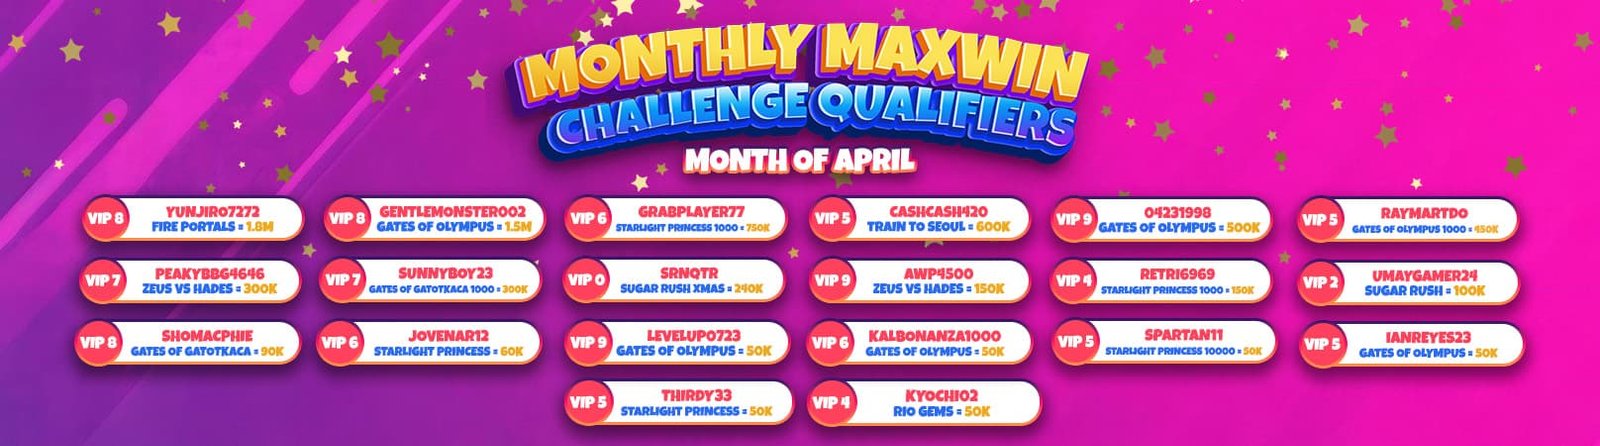 Monthly Maxwin Challenge Qualifiers - Web Version